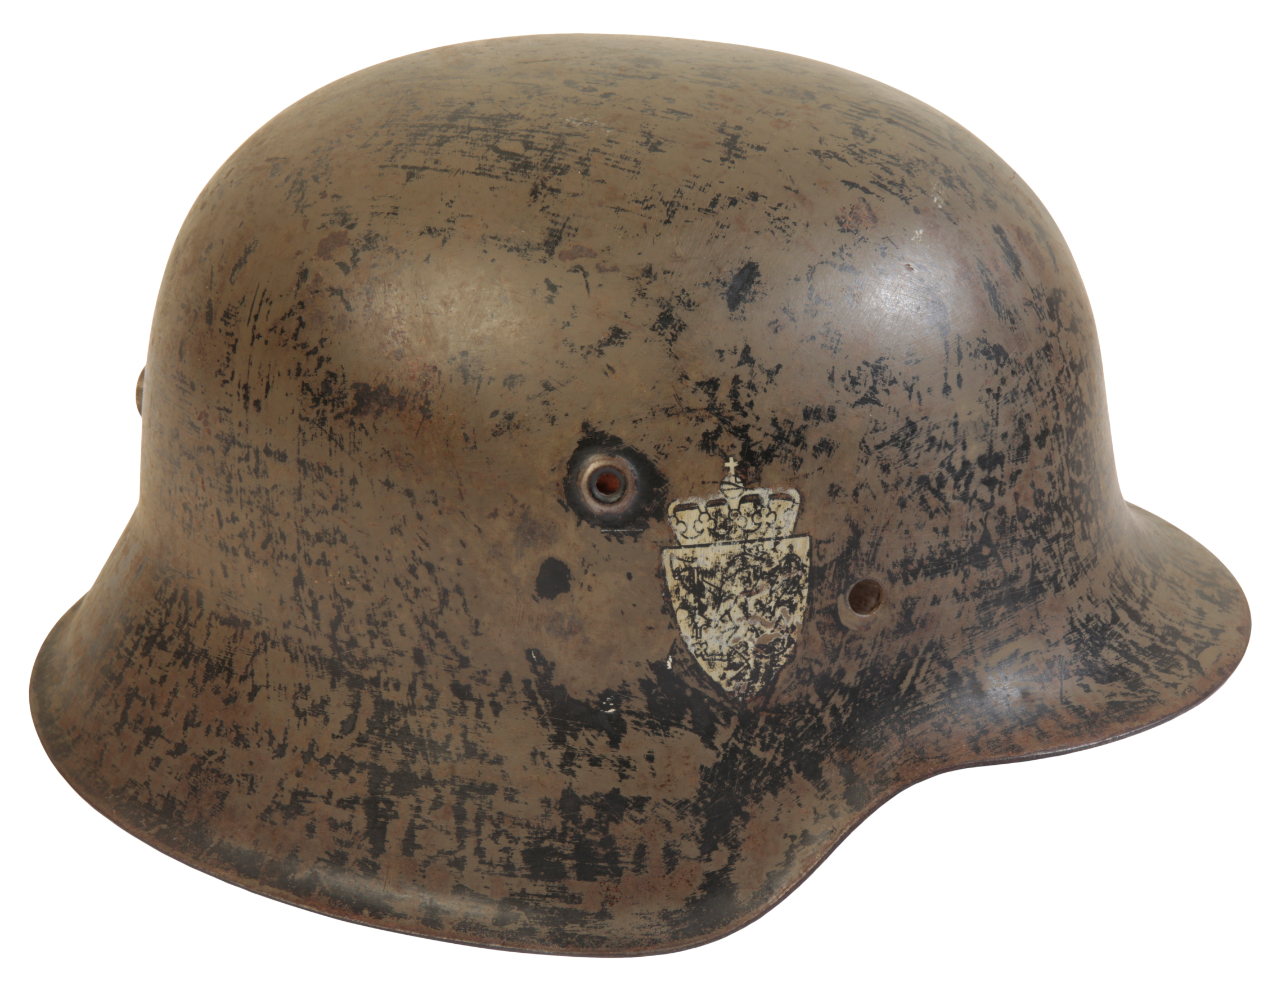 A WWII GERMAN STYLE HELMET with 3adeb9